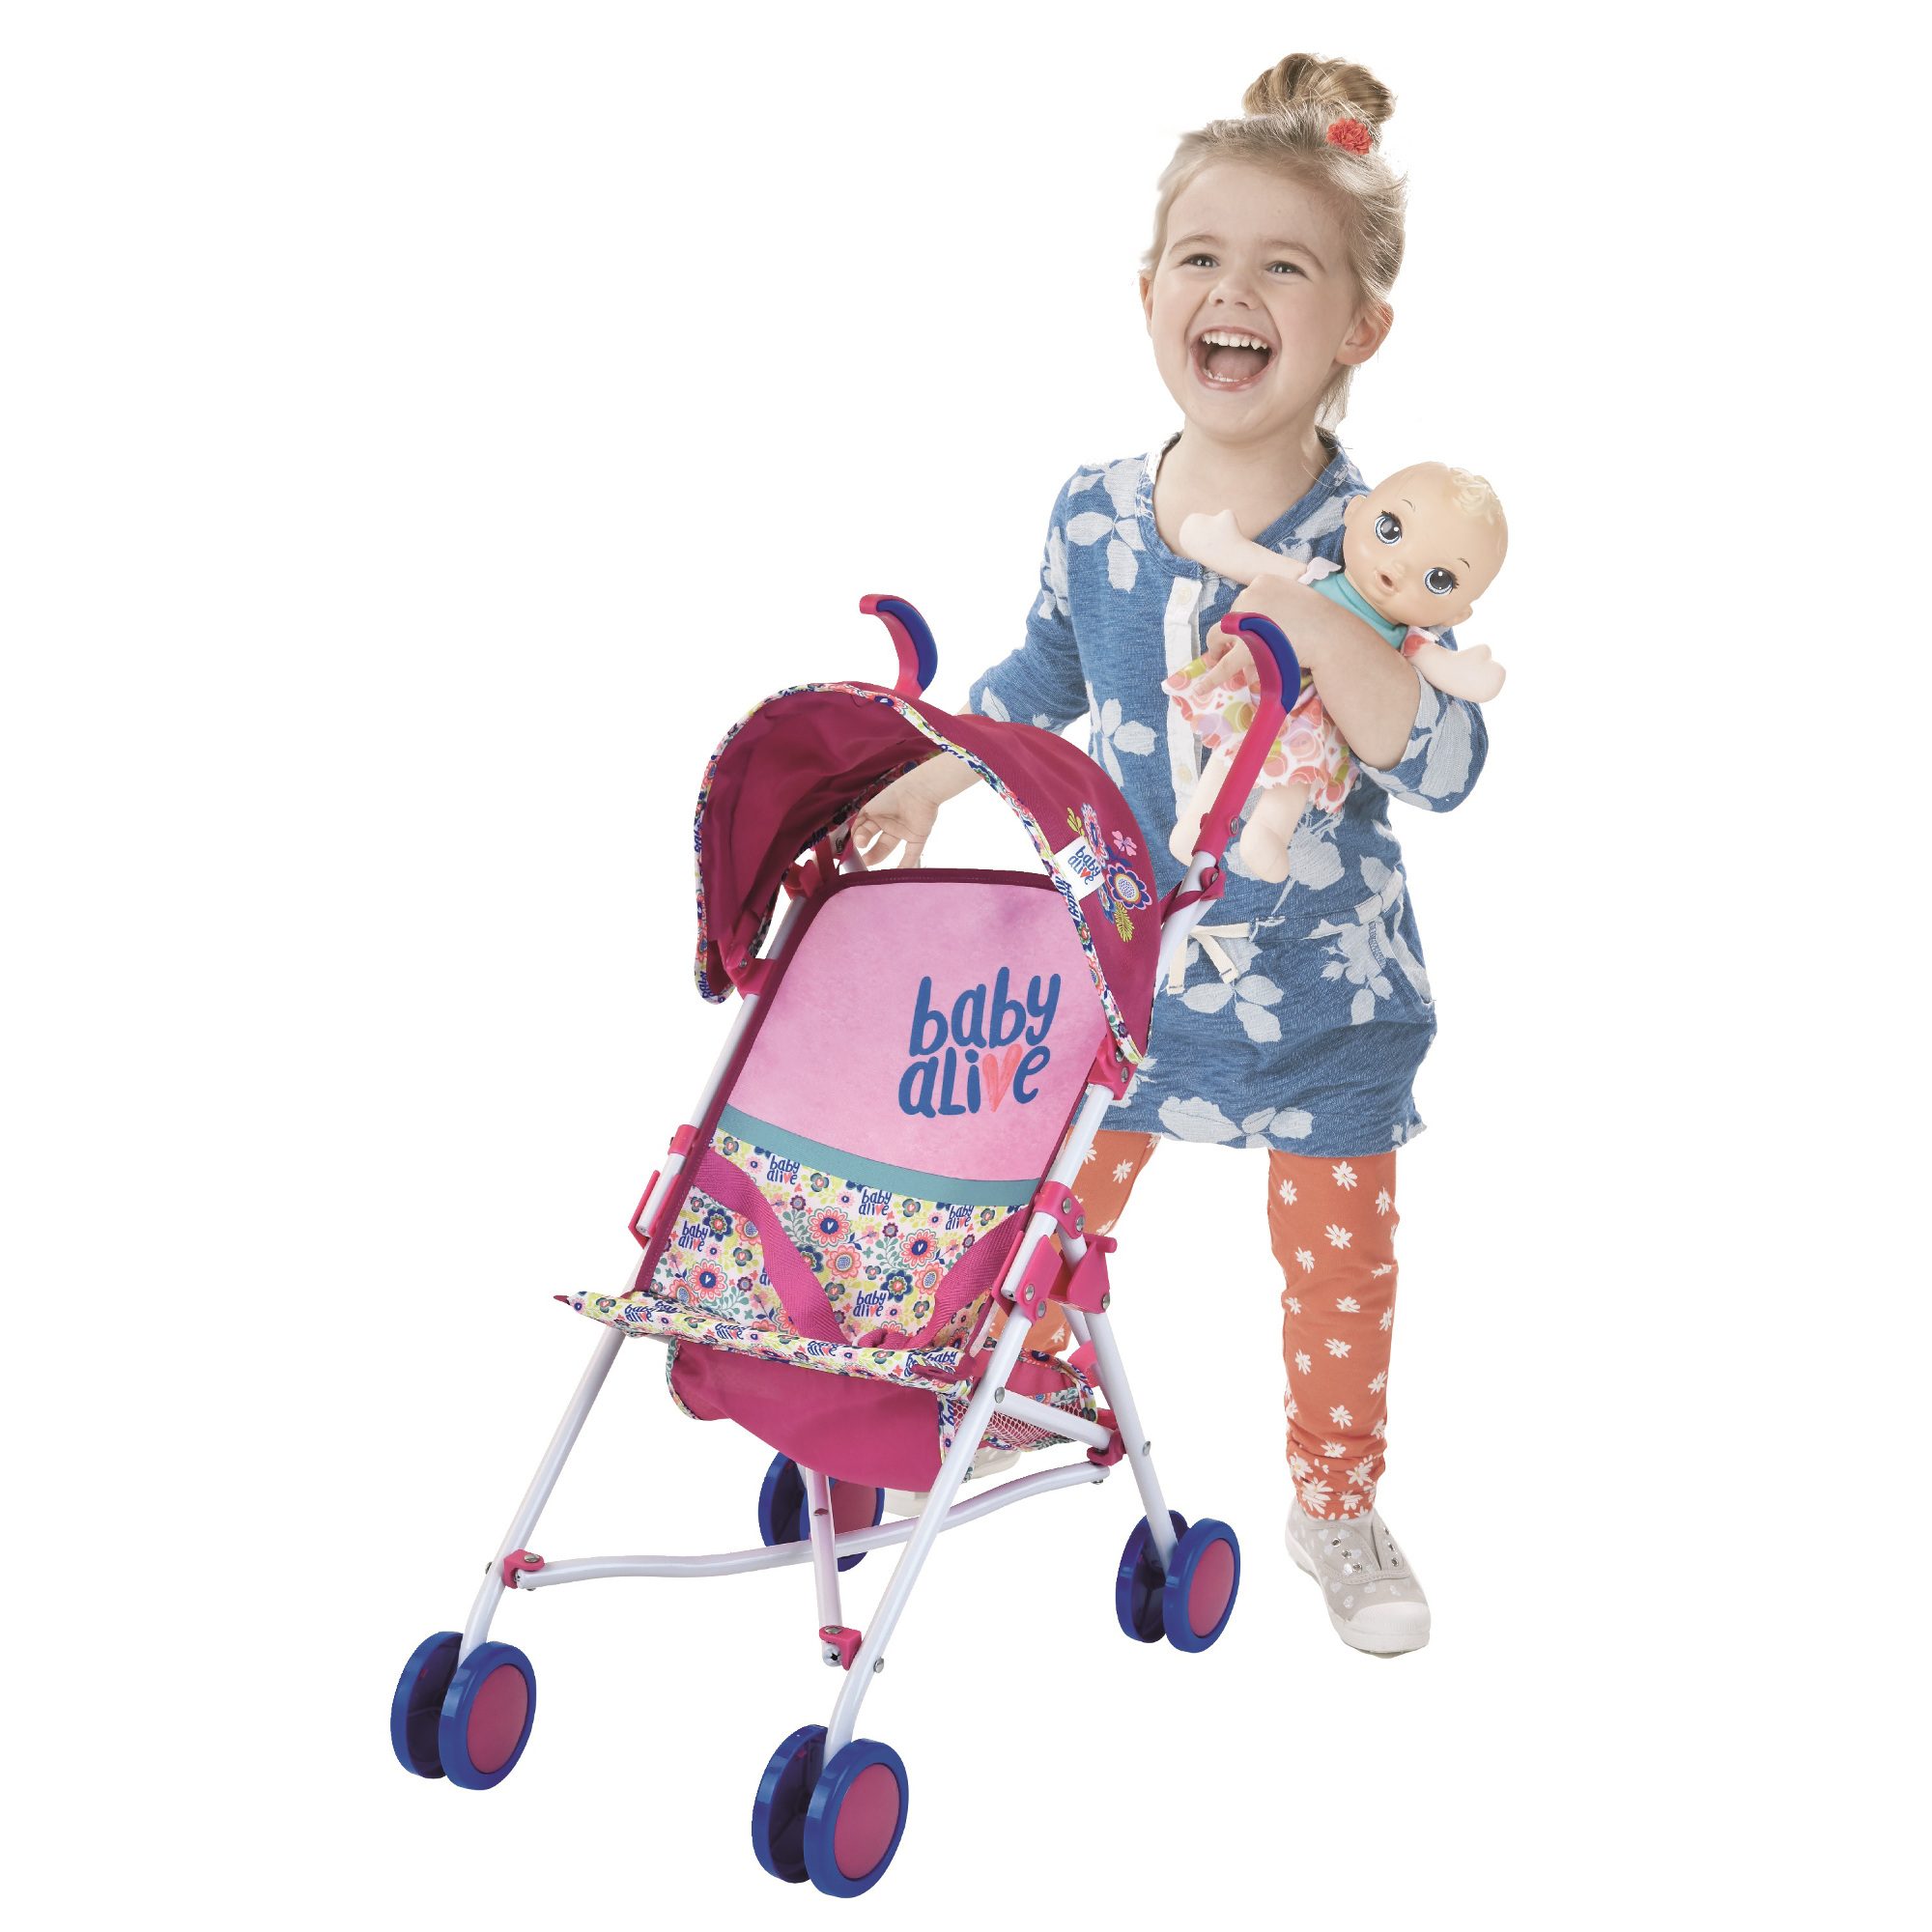 doll baby strollers